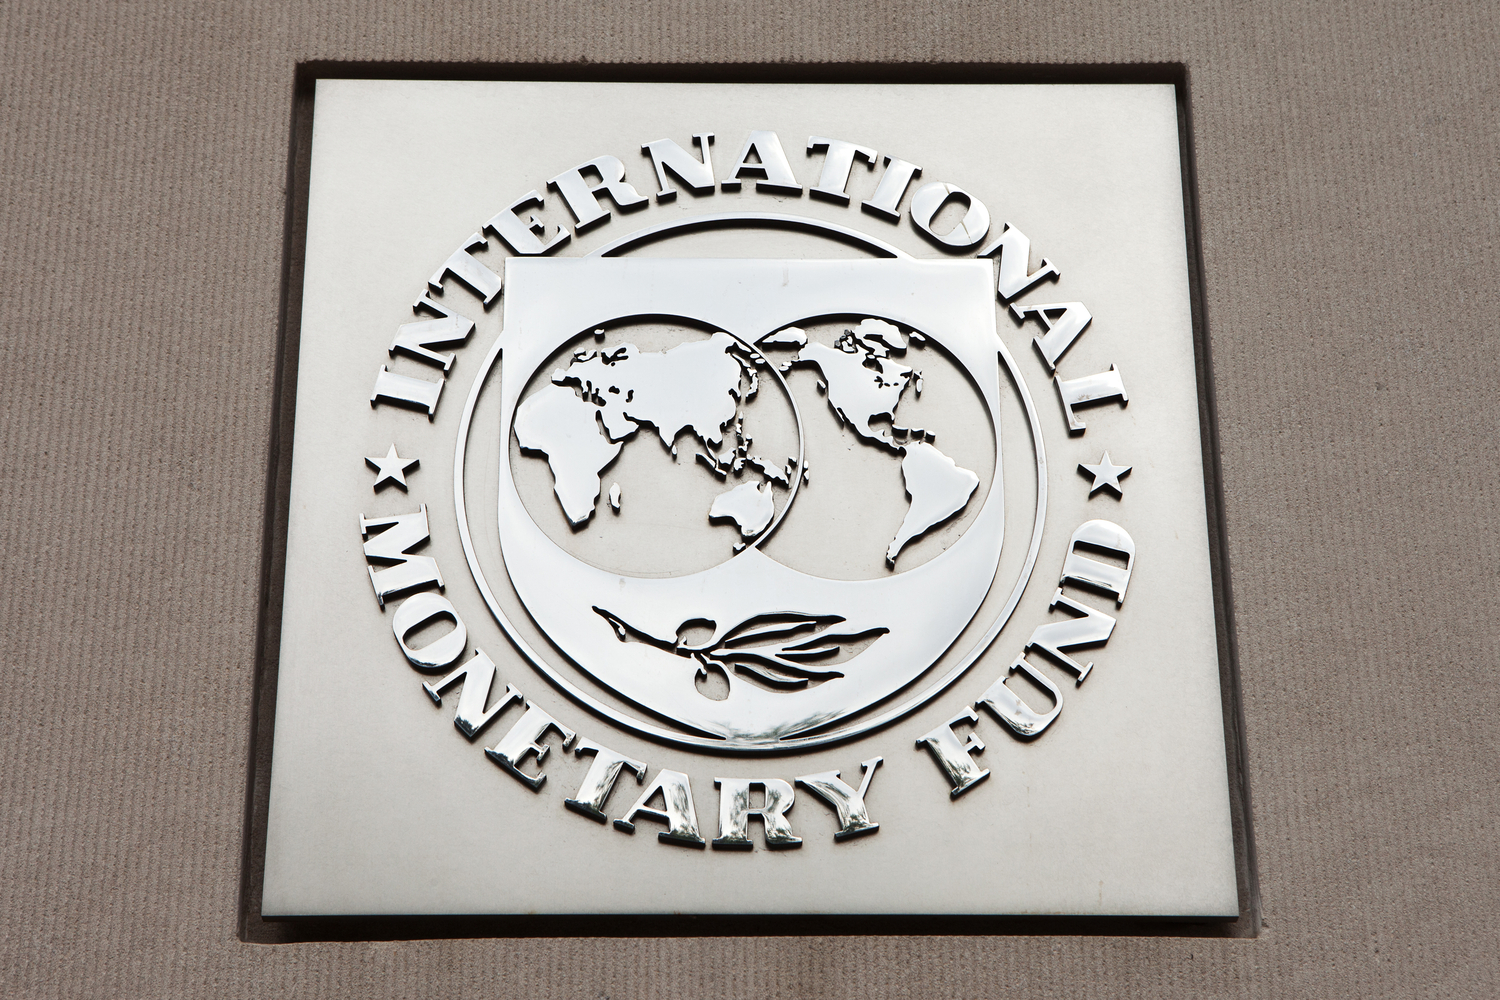 Private-firms-can-boost-central-bank-digital-currencies,-imf-official-says